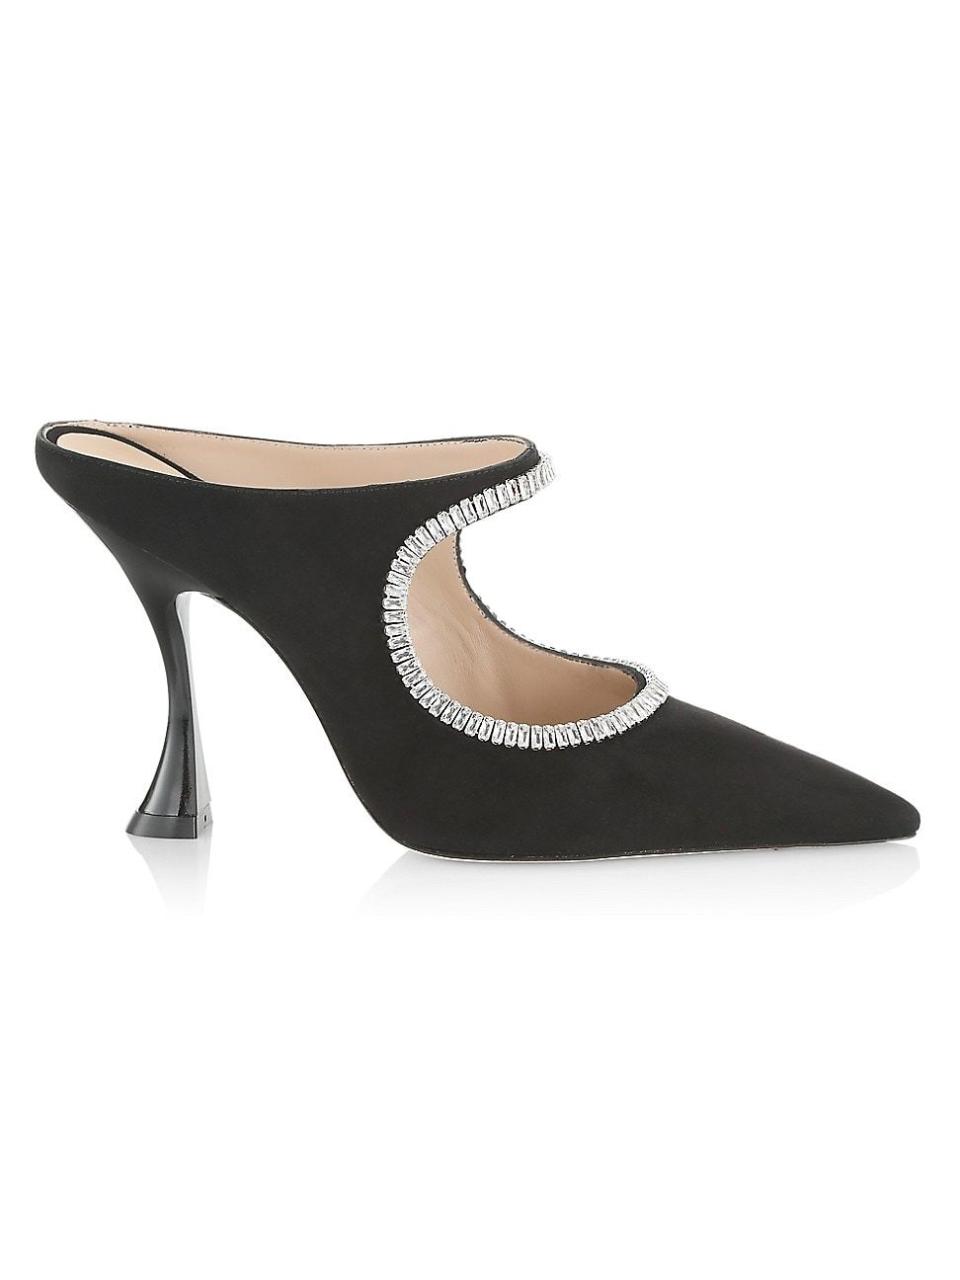 16) Women's Curve Crystal-Embellished Suede Mules